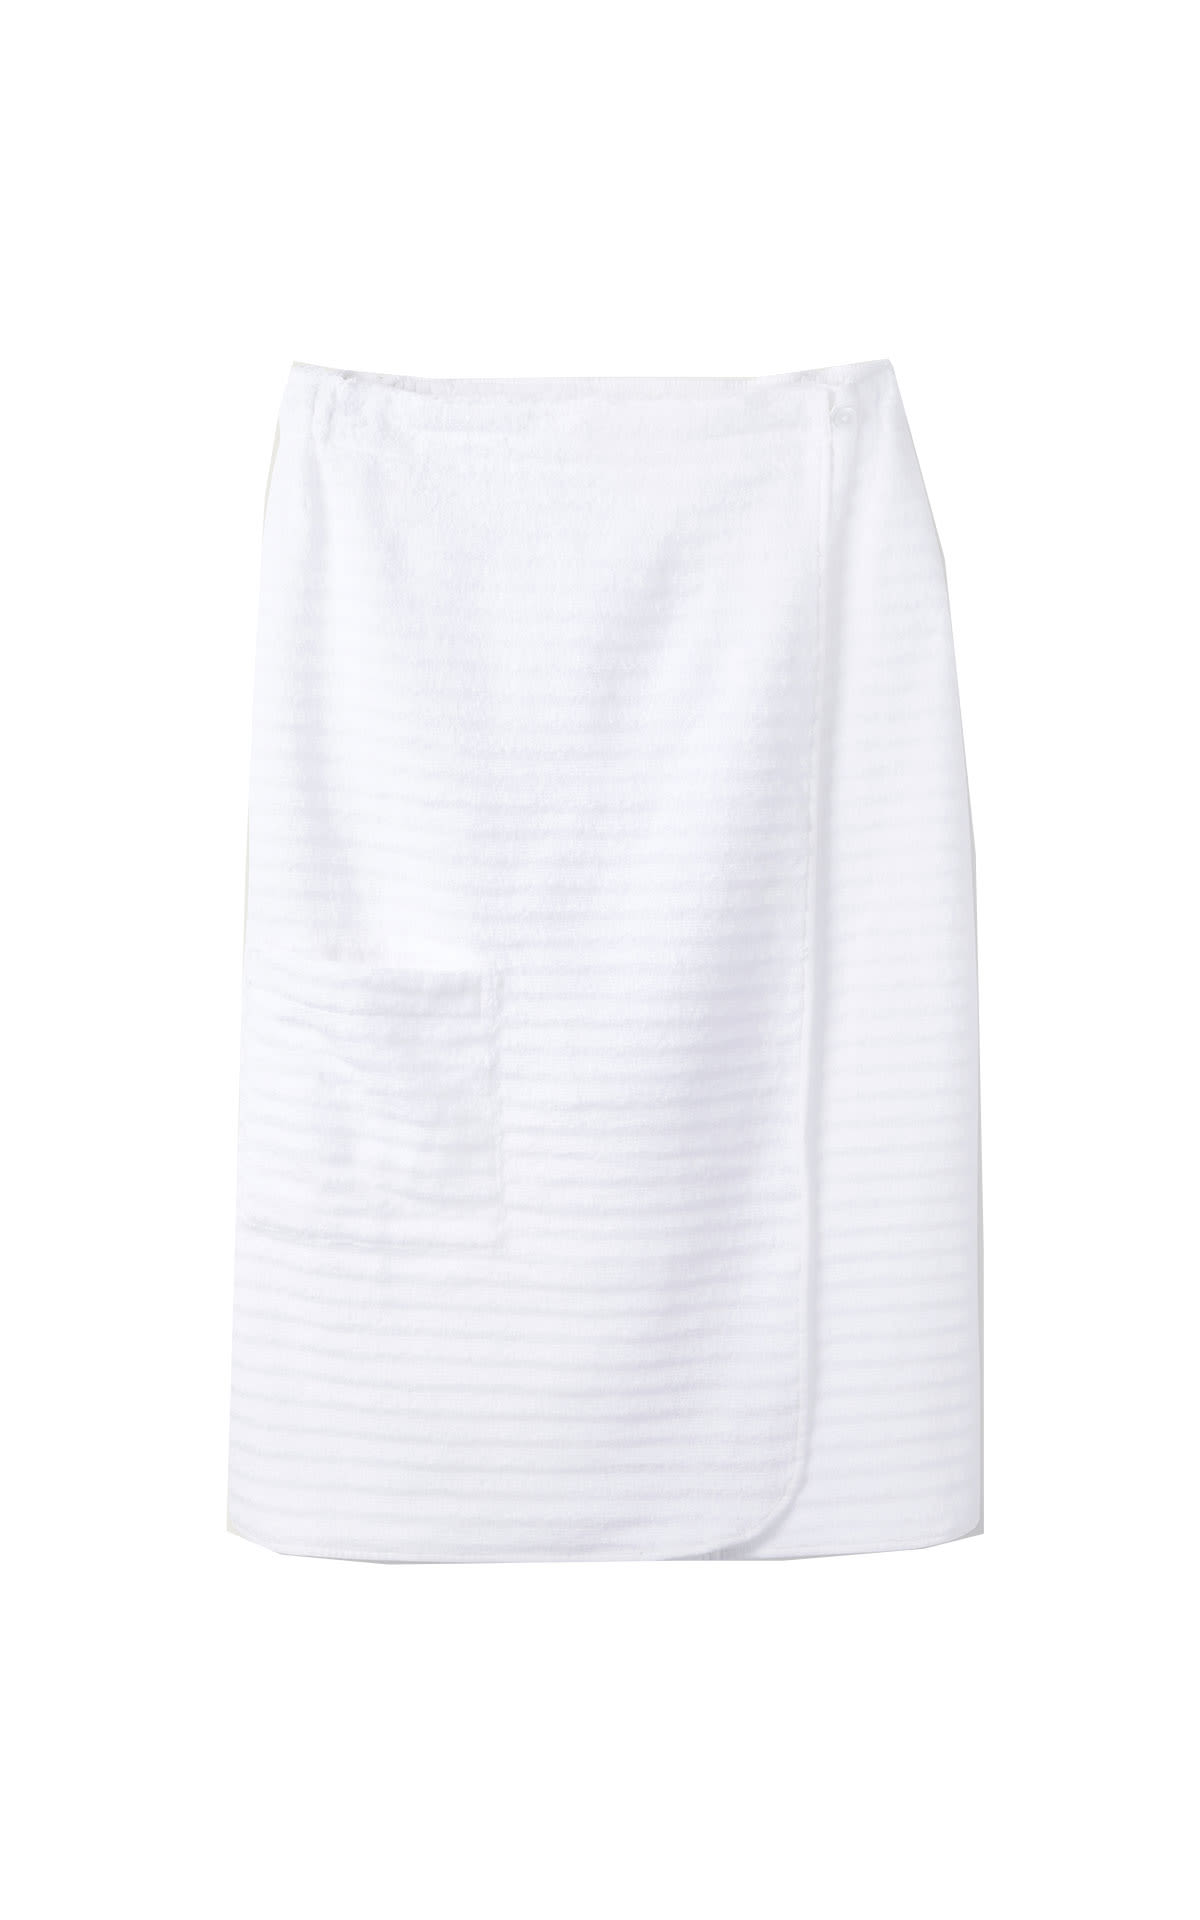 The White Company SPA rib towel wrap from Bicester Village